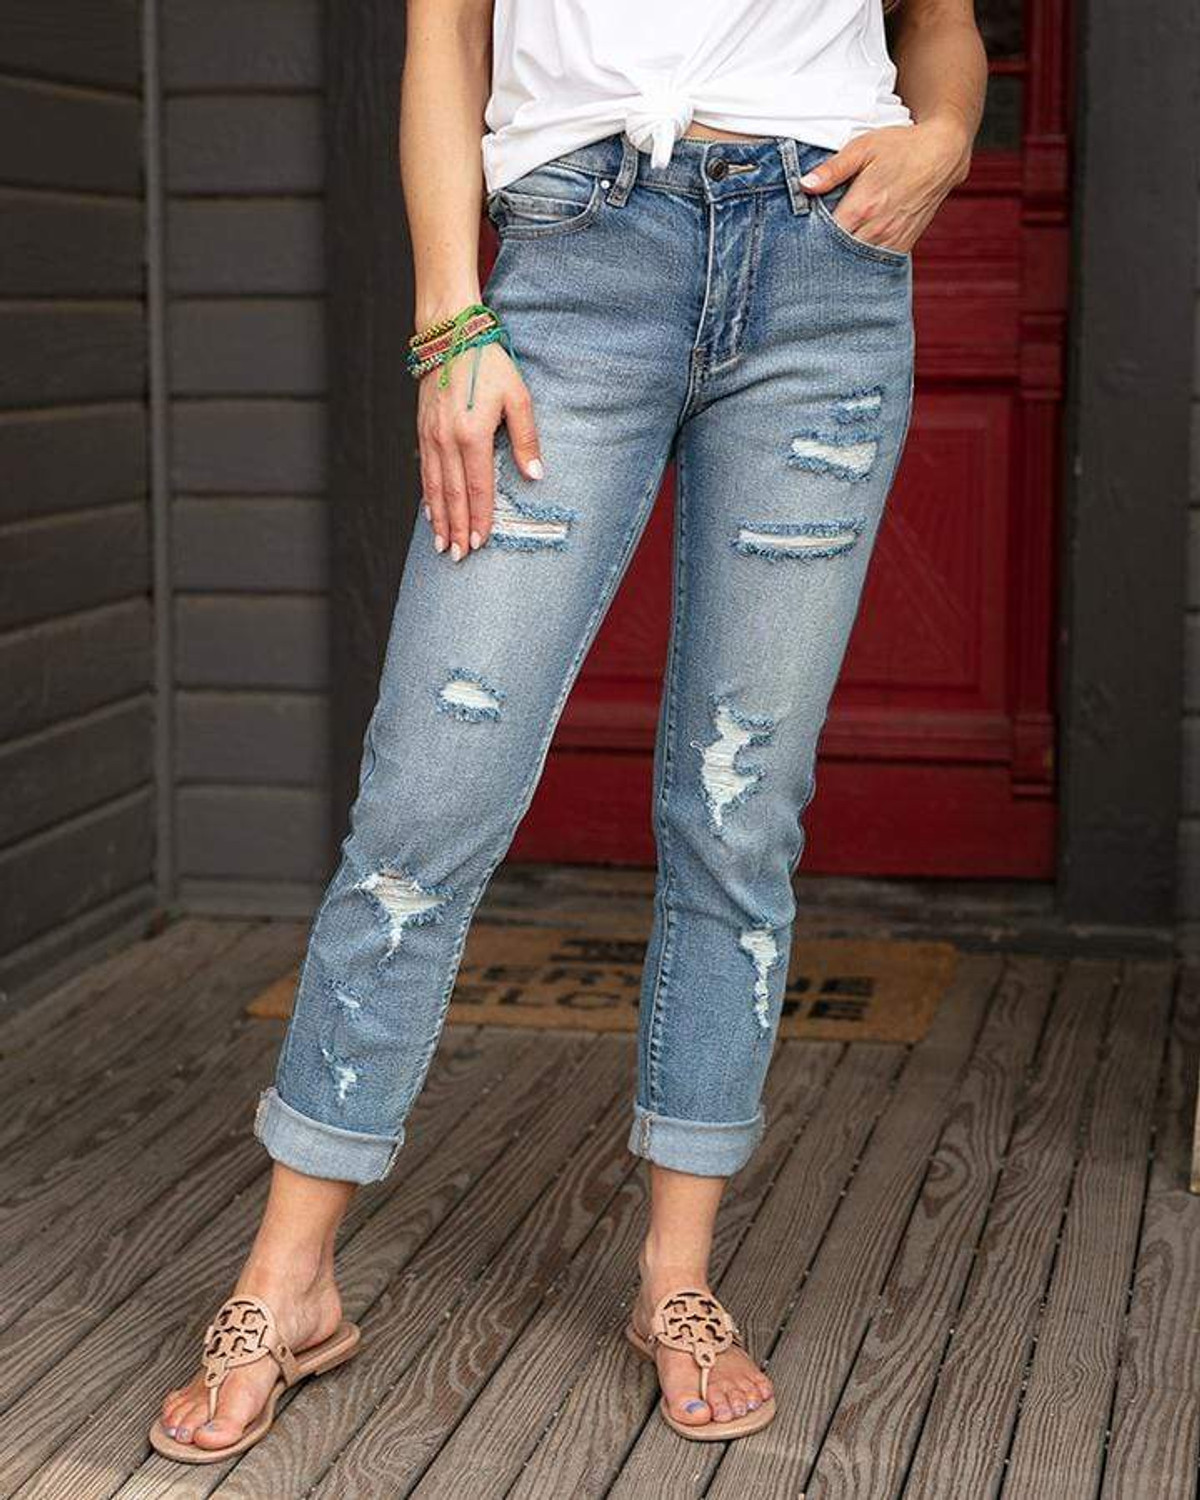 https://cdn11.bigcommerce.com/s-xhdw5oo/images/stencil/1200x1800/products/2072/6349/new-item-favorite-girlfriend-jeans-distressed-14658483748946_2048x__92121.1675794515.jpg?c=2